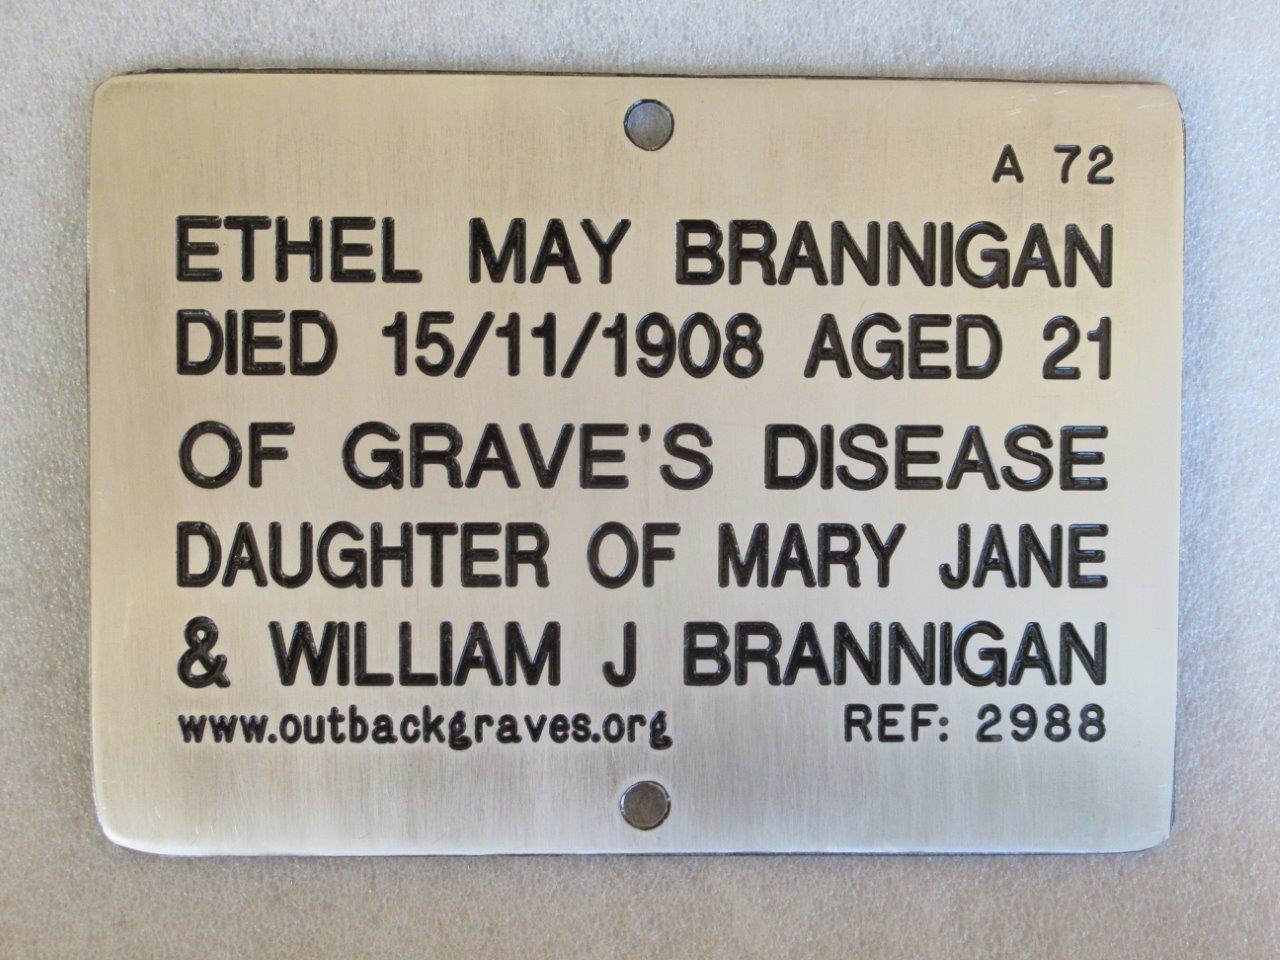 This is a photograph of plaque number 2988 for ETHEL MAY BRANNIGAN at Mt MORGANS